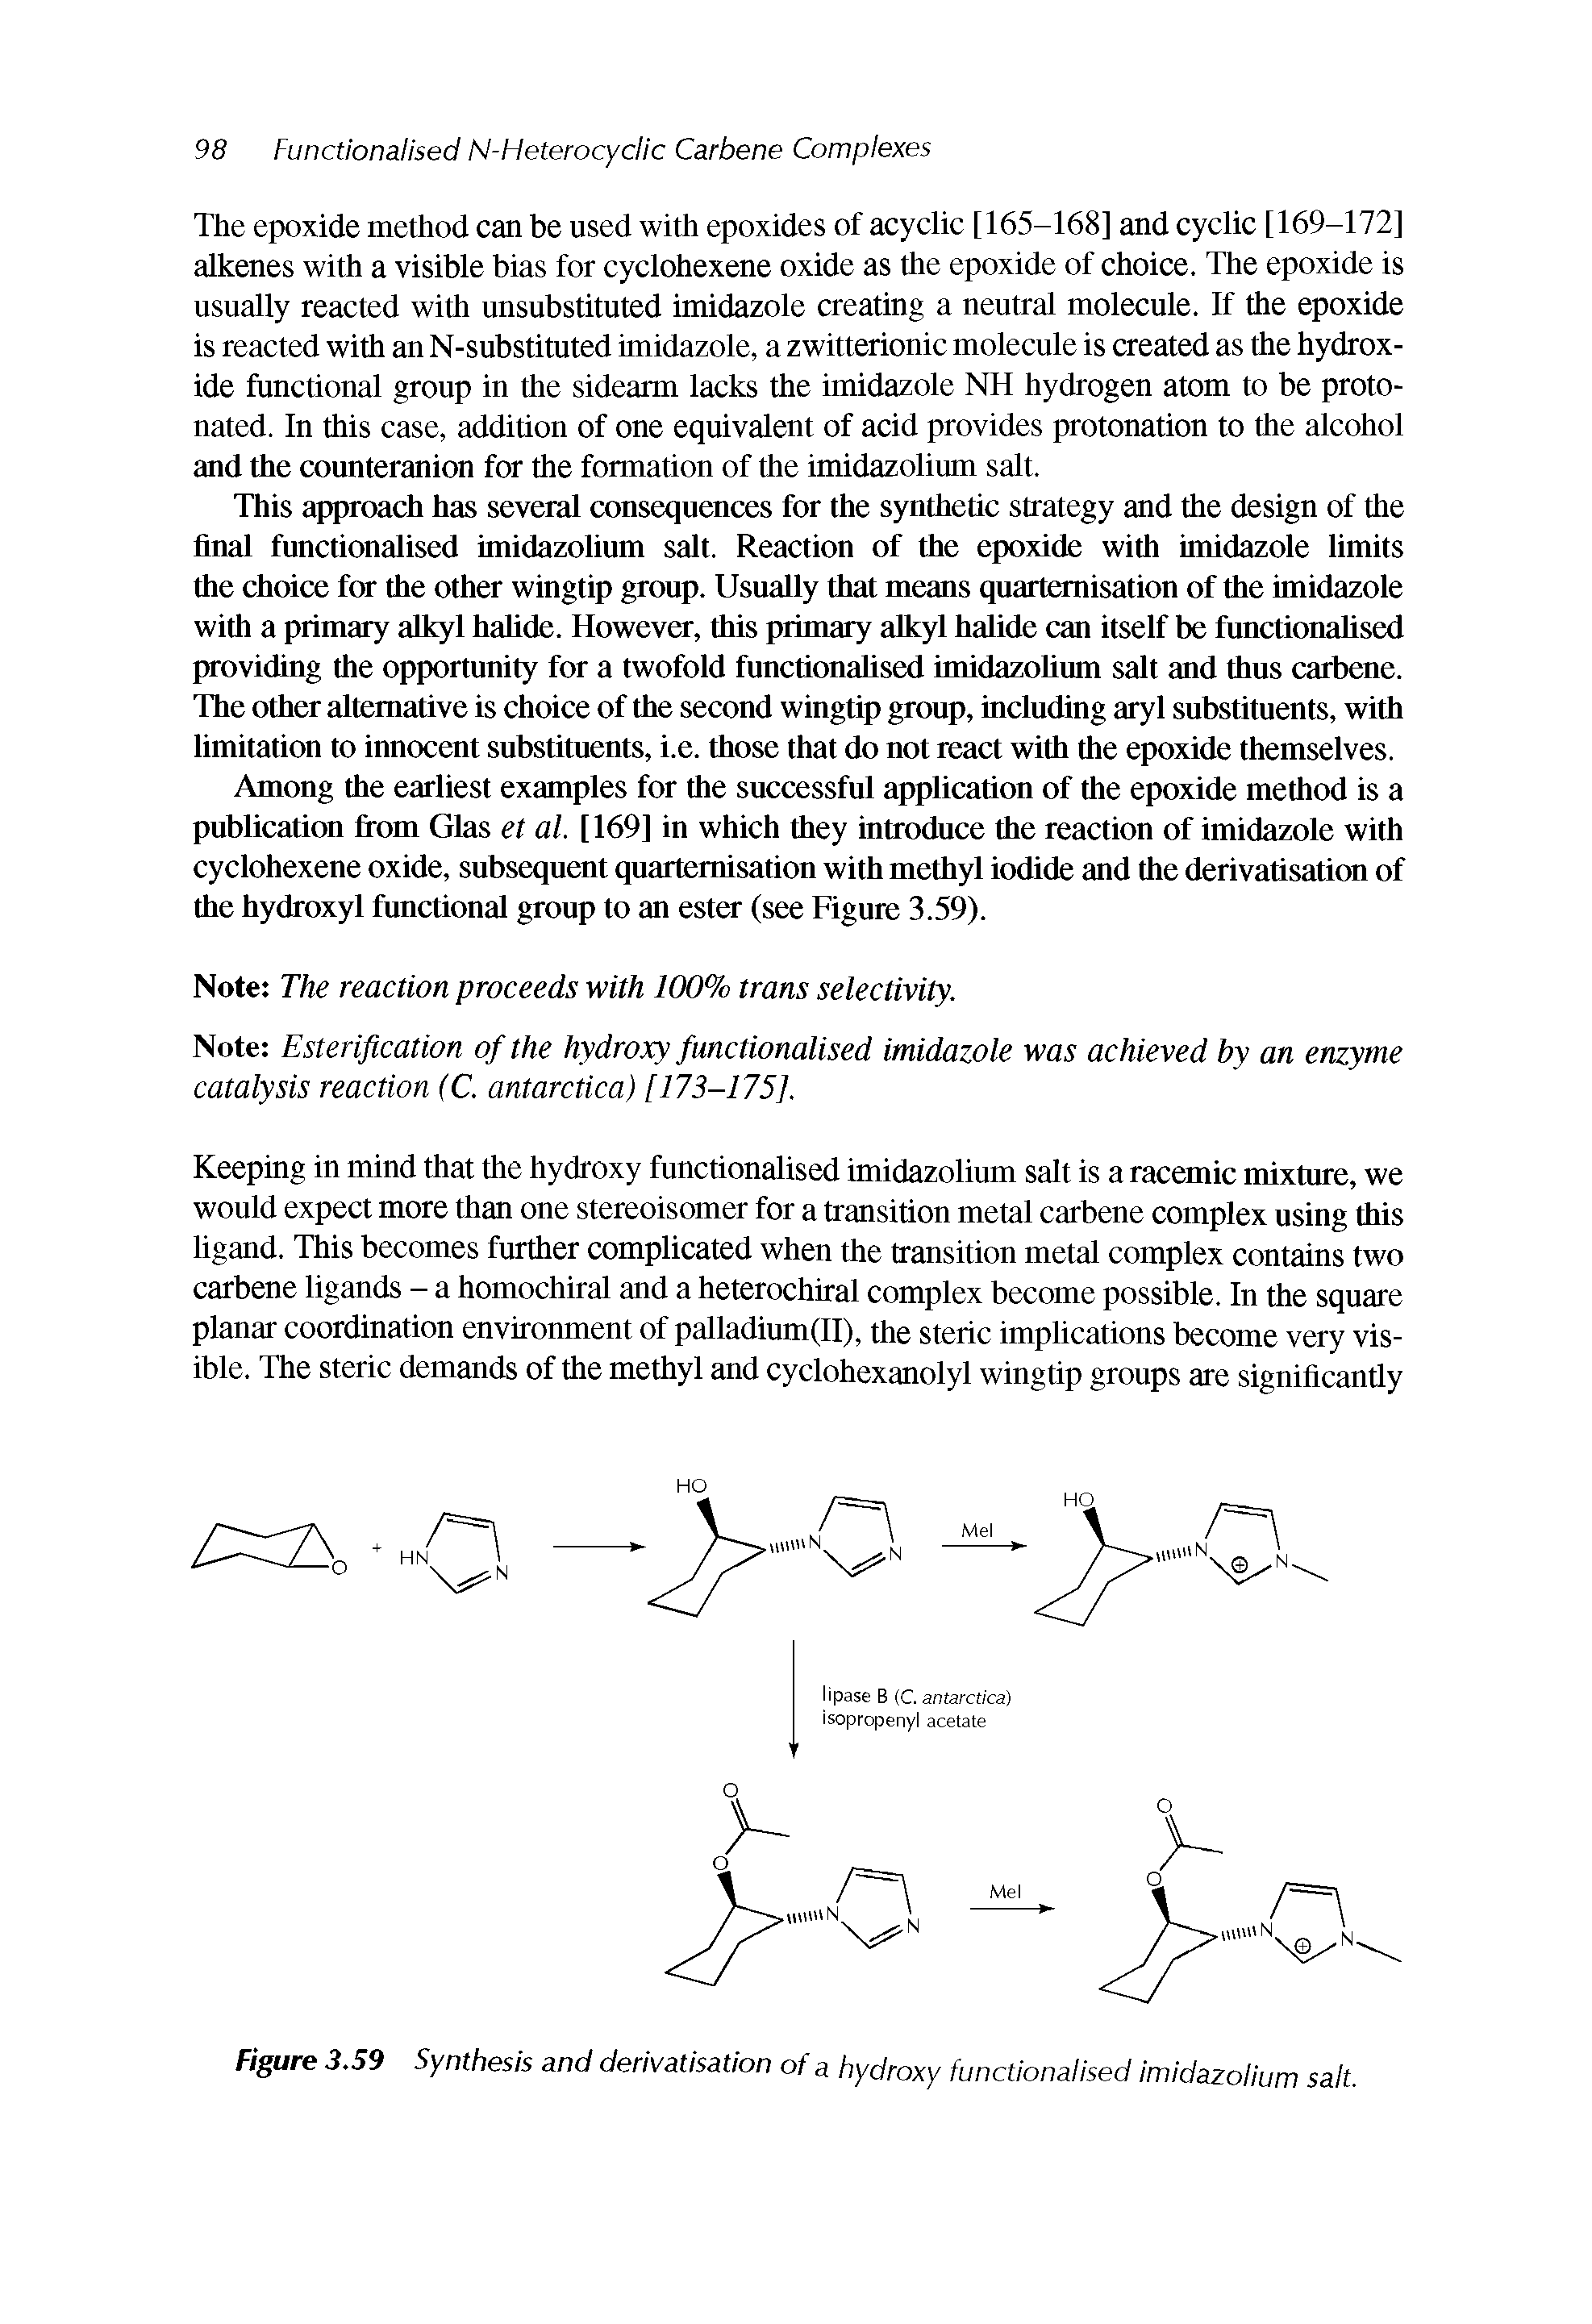 Figure 3.59 Synthesis and derivatisation of a hydroxy functionalised imidazolium salt.